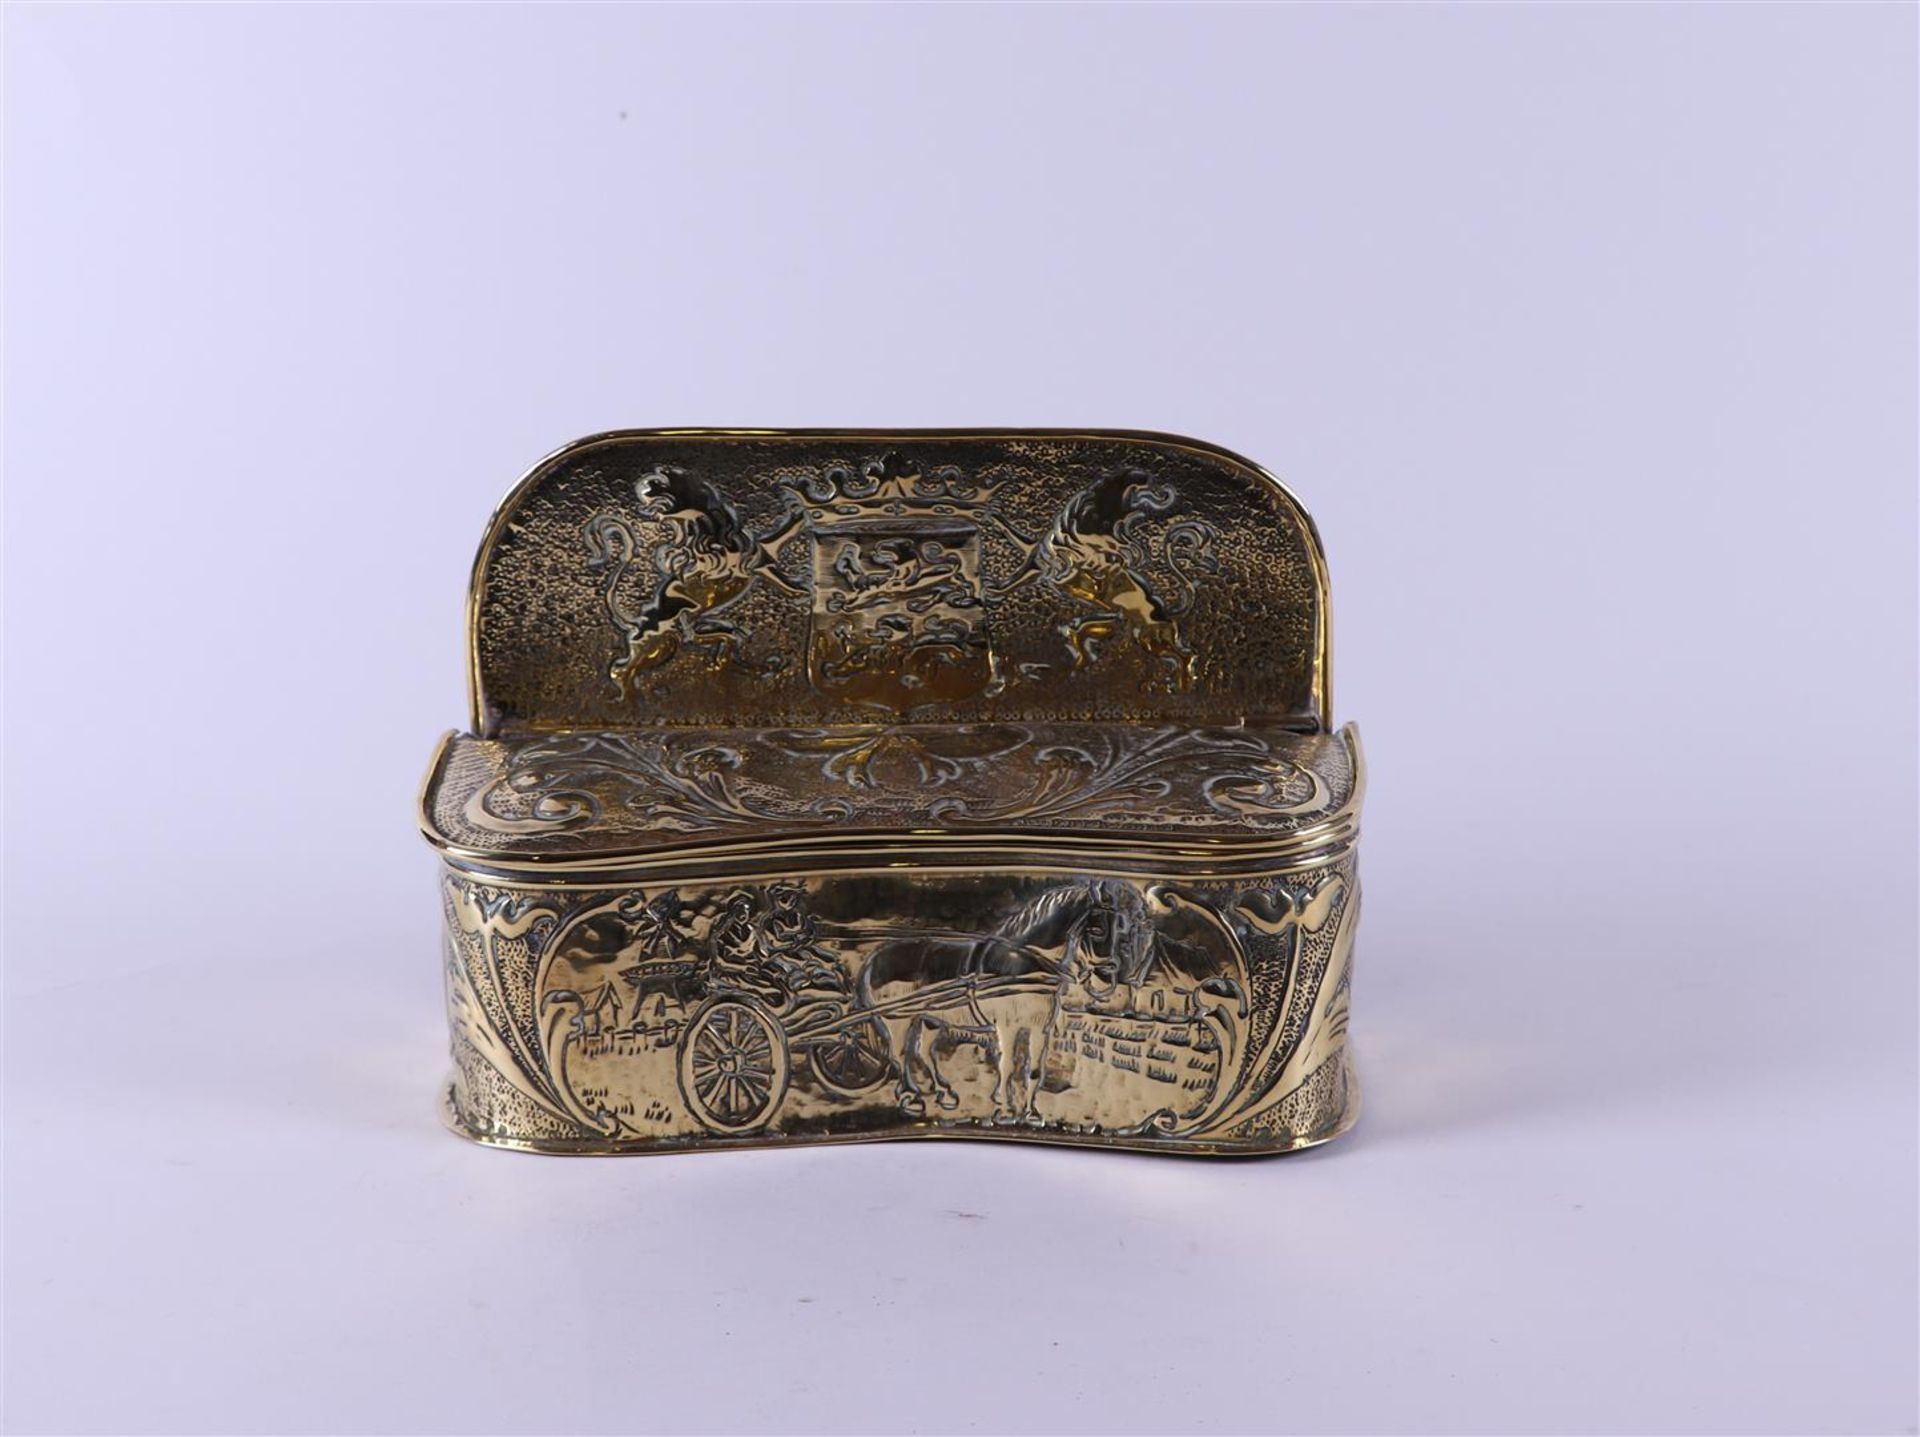 A copper tinder box with lid, Friesland, 19th century.
20 x 26 x 10 cm.